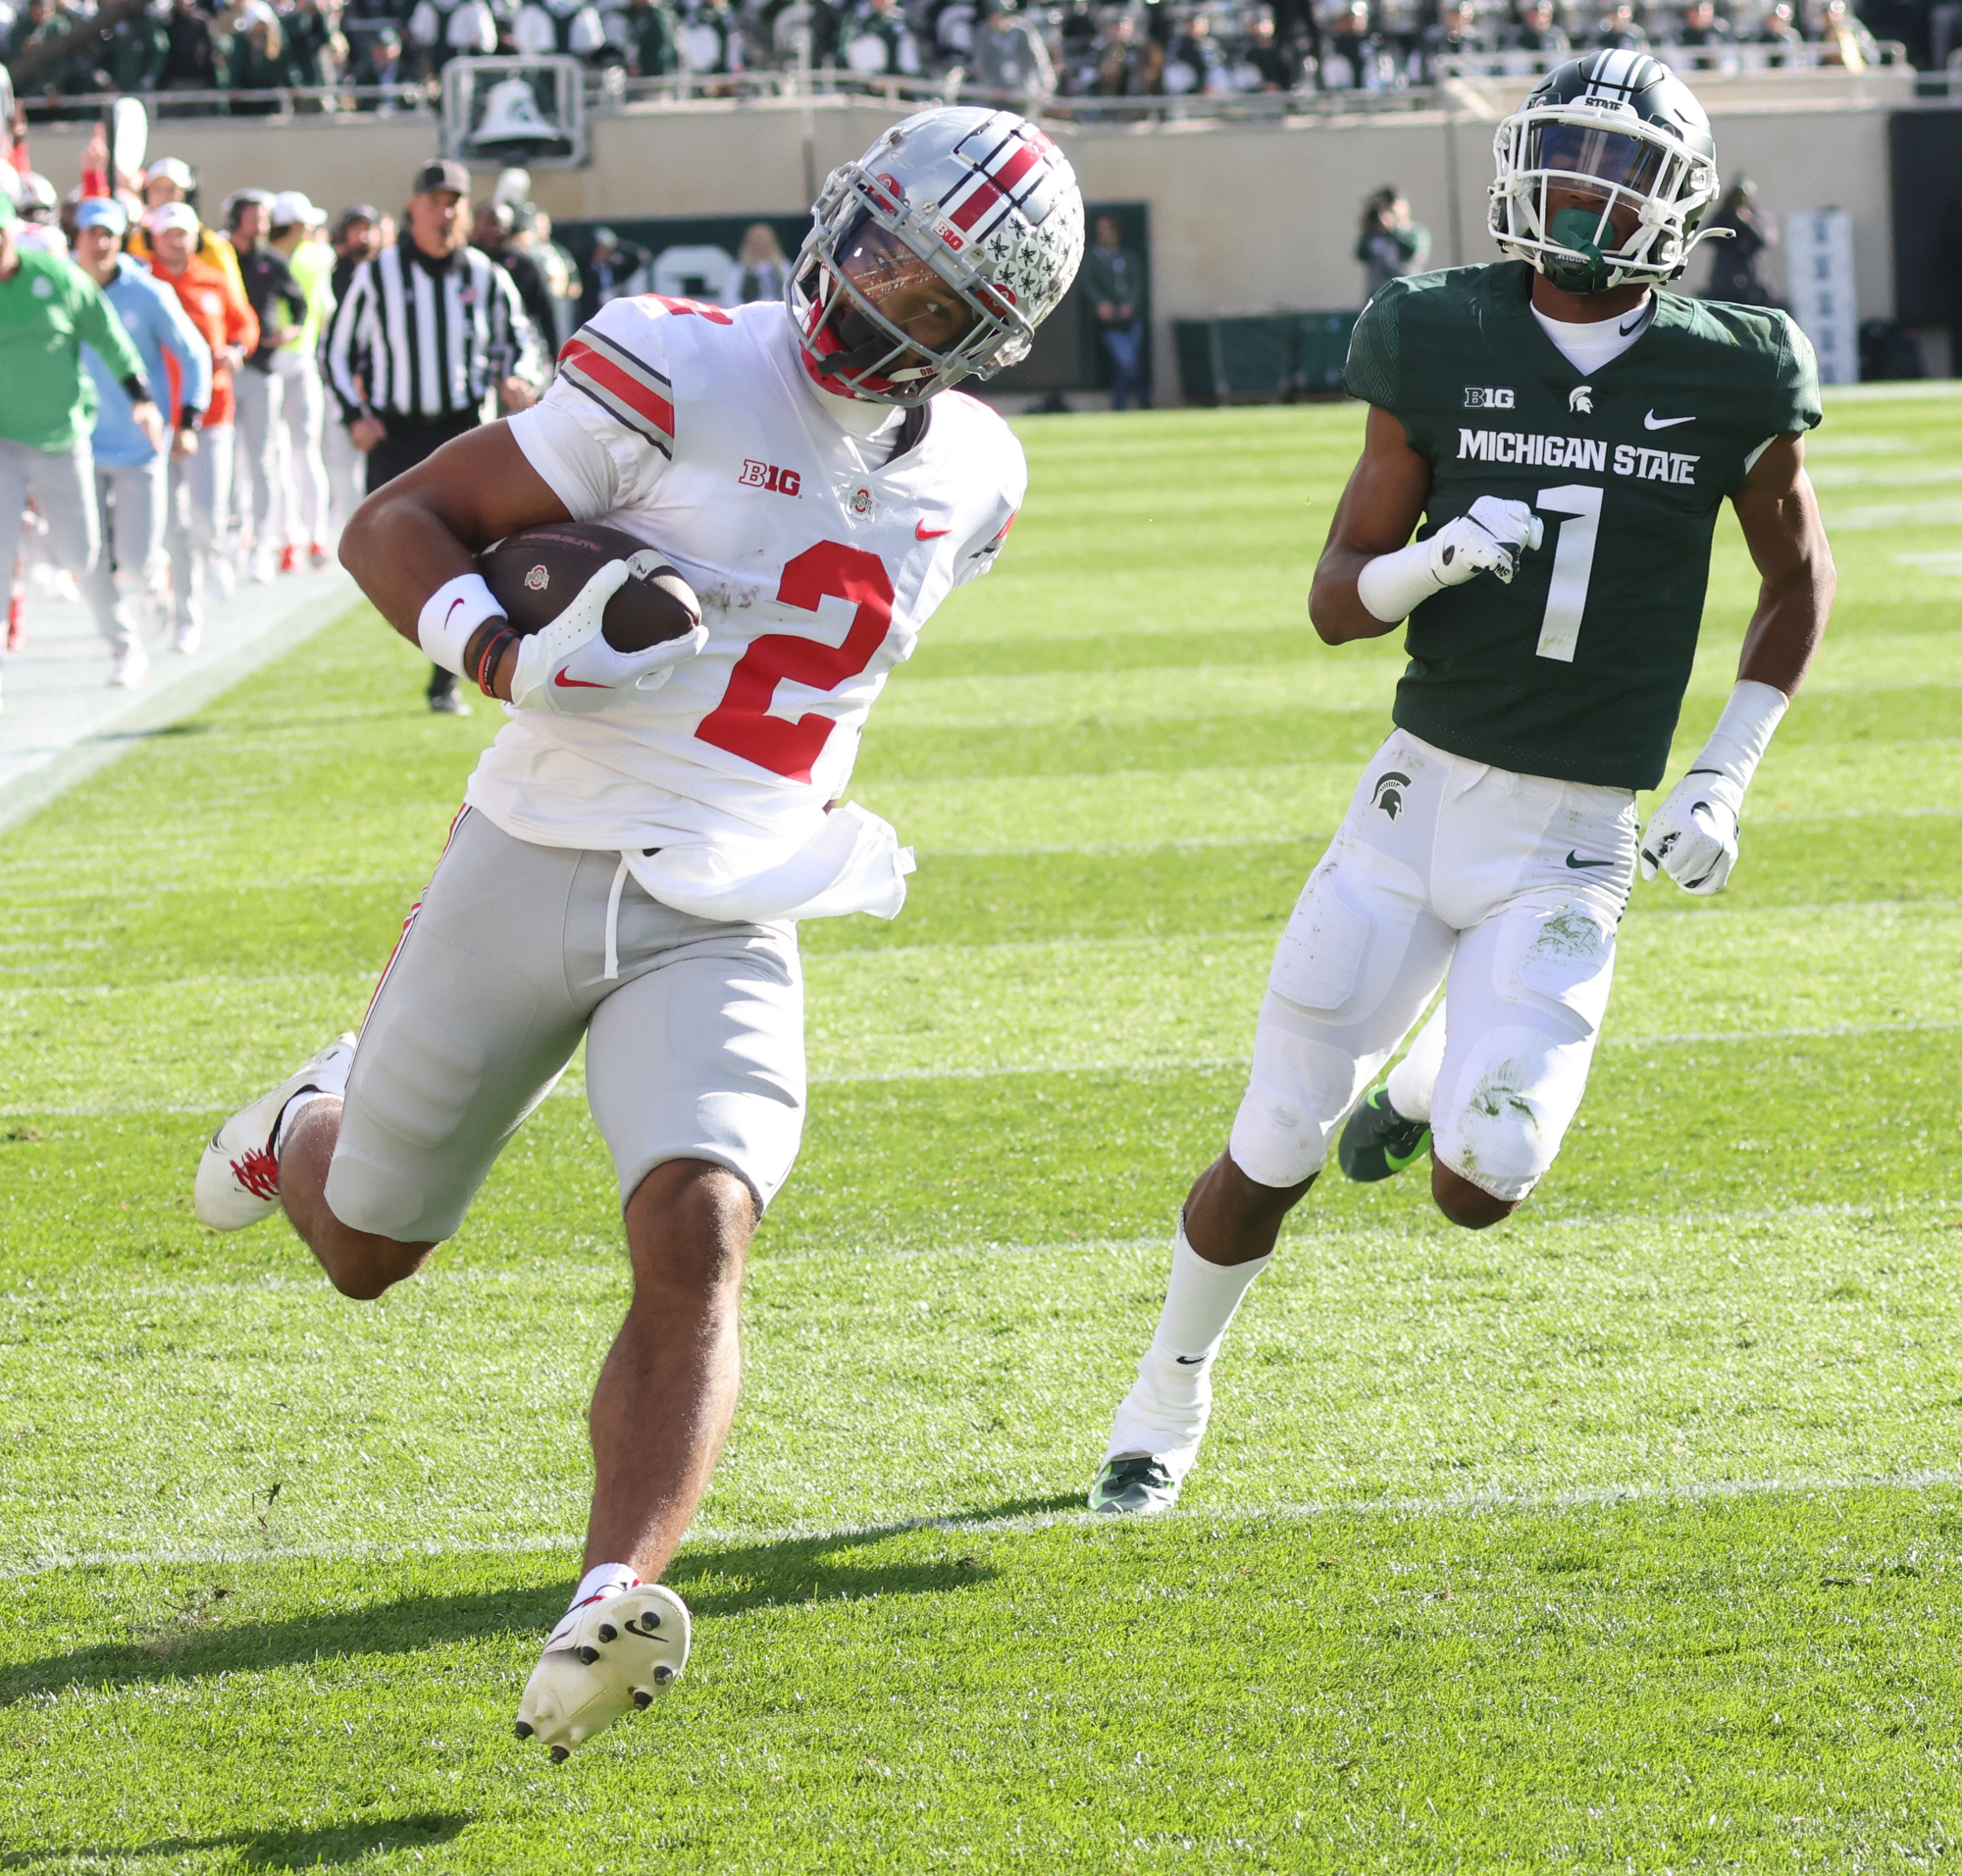 Anxiety ahead for Big Ten as Ohio State football's Marvin Harrison